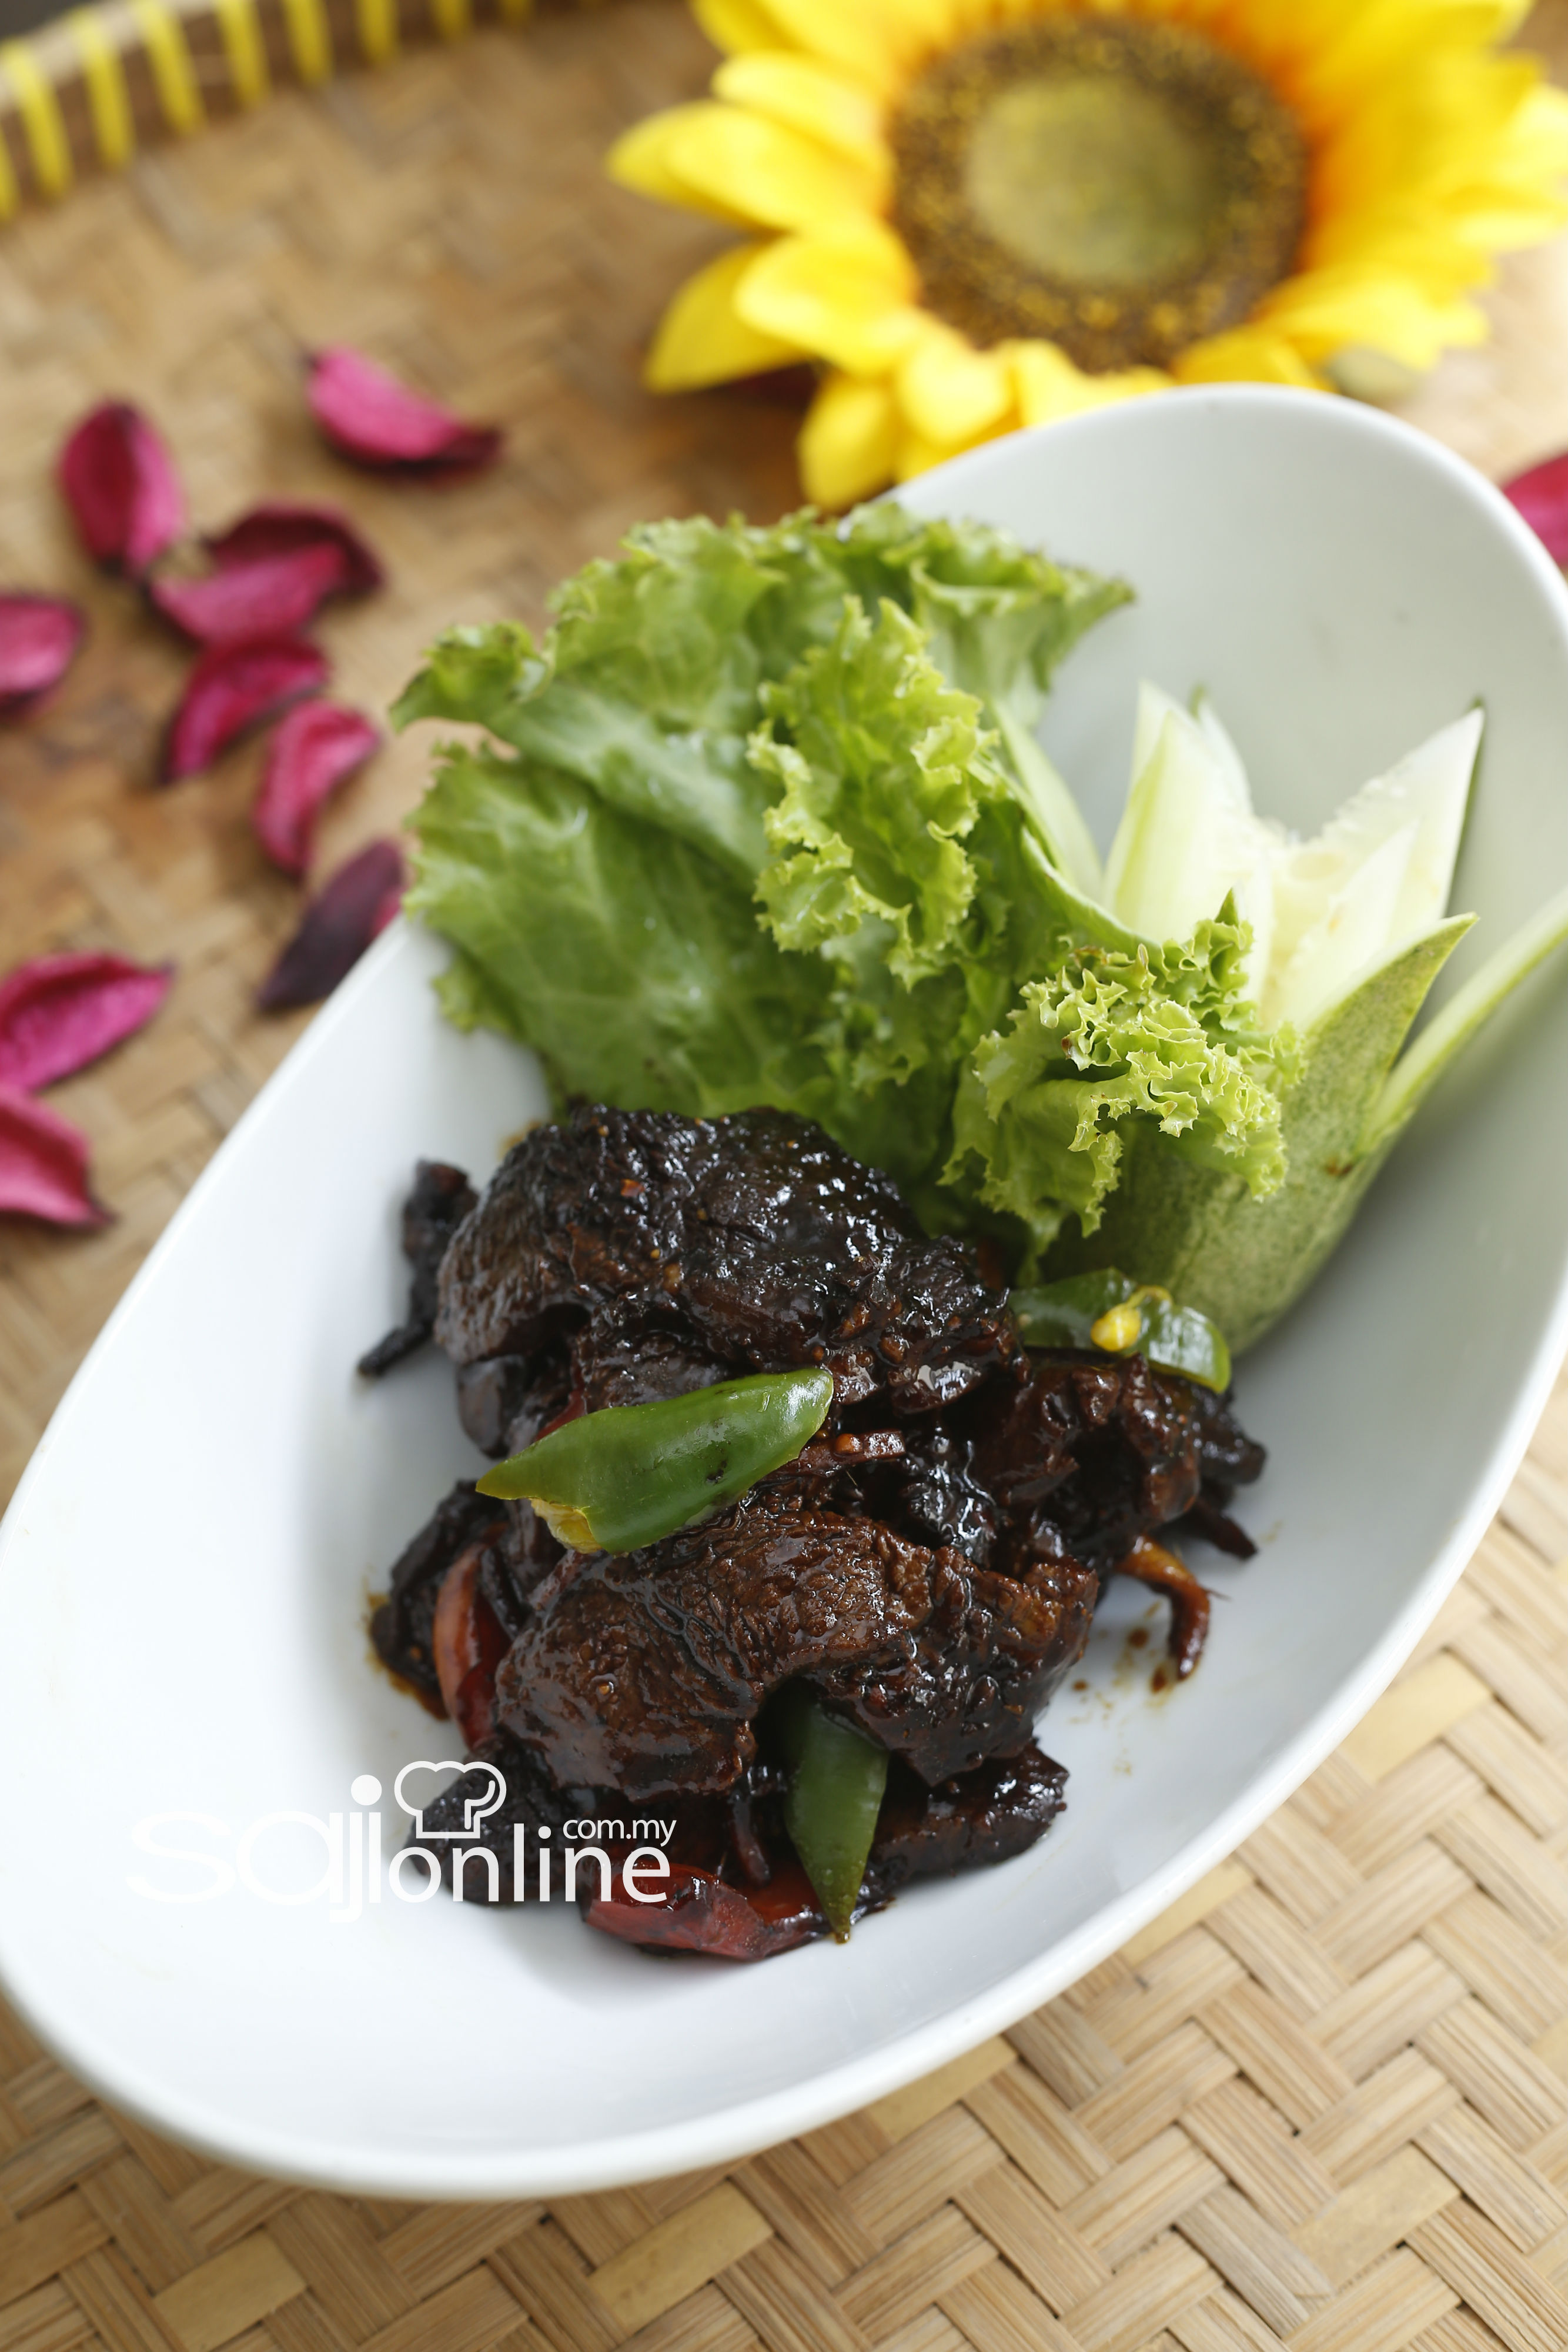 Ayam & Daging Archives - Page 9 of 37 - Saji Online